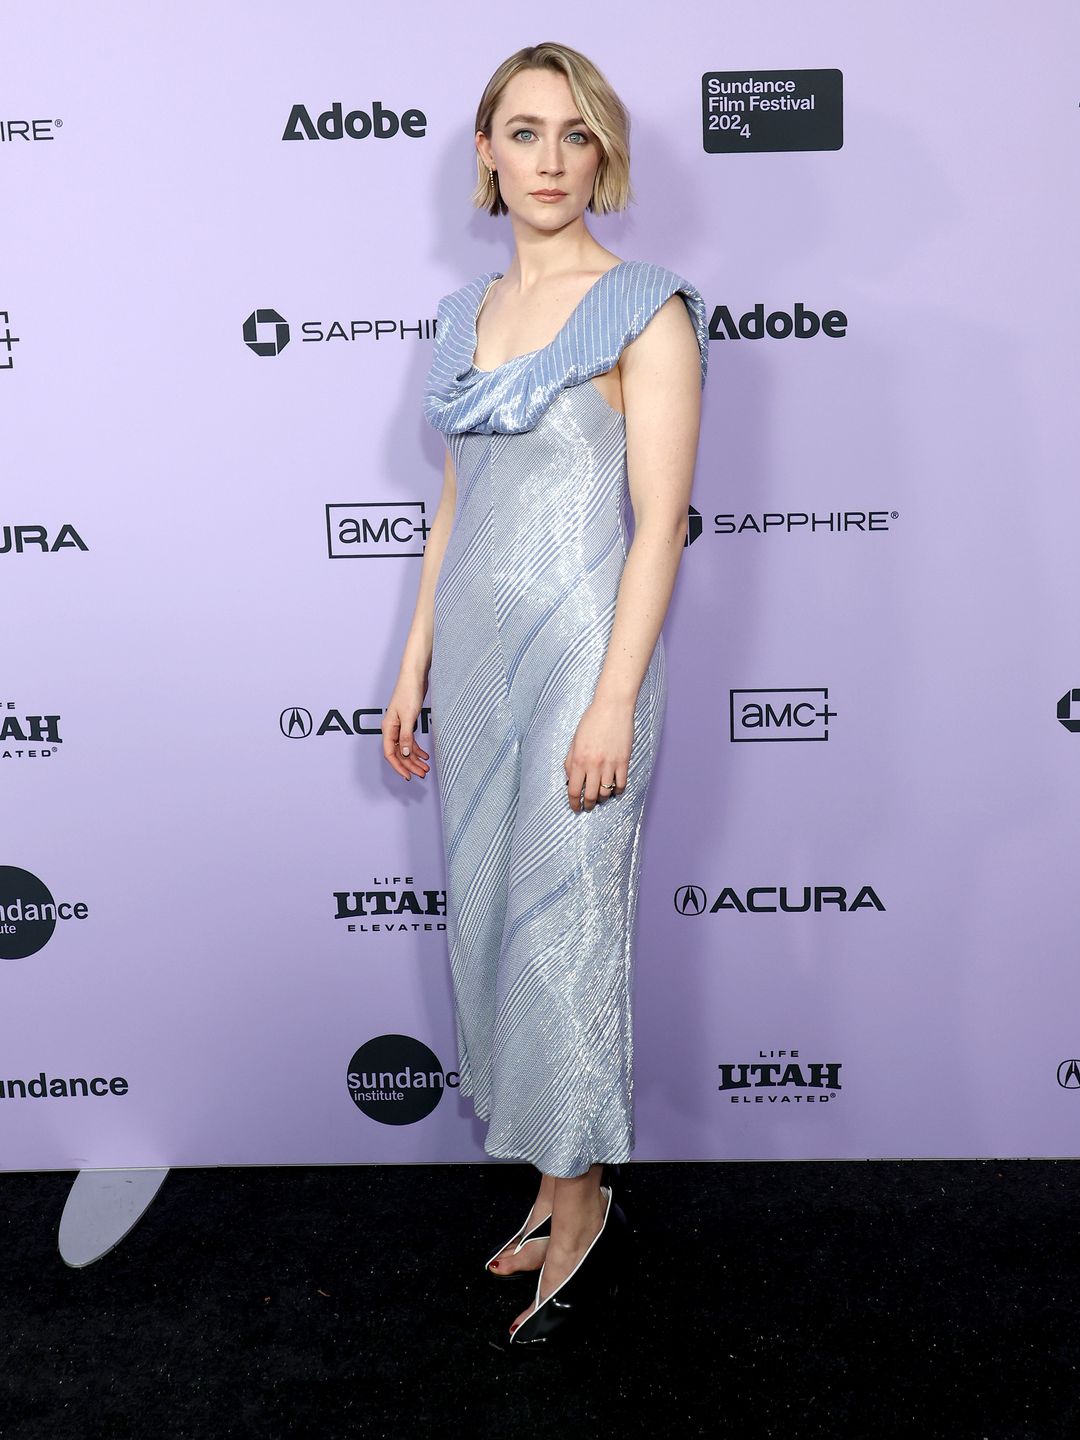 Saoirse Ronan attends "The Outrun" Premiere during the 2024 Sundance Film Festival wearing a baby blue sequin jumpsuit and heels